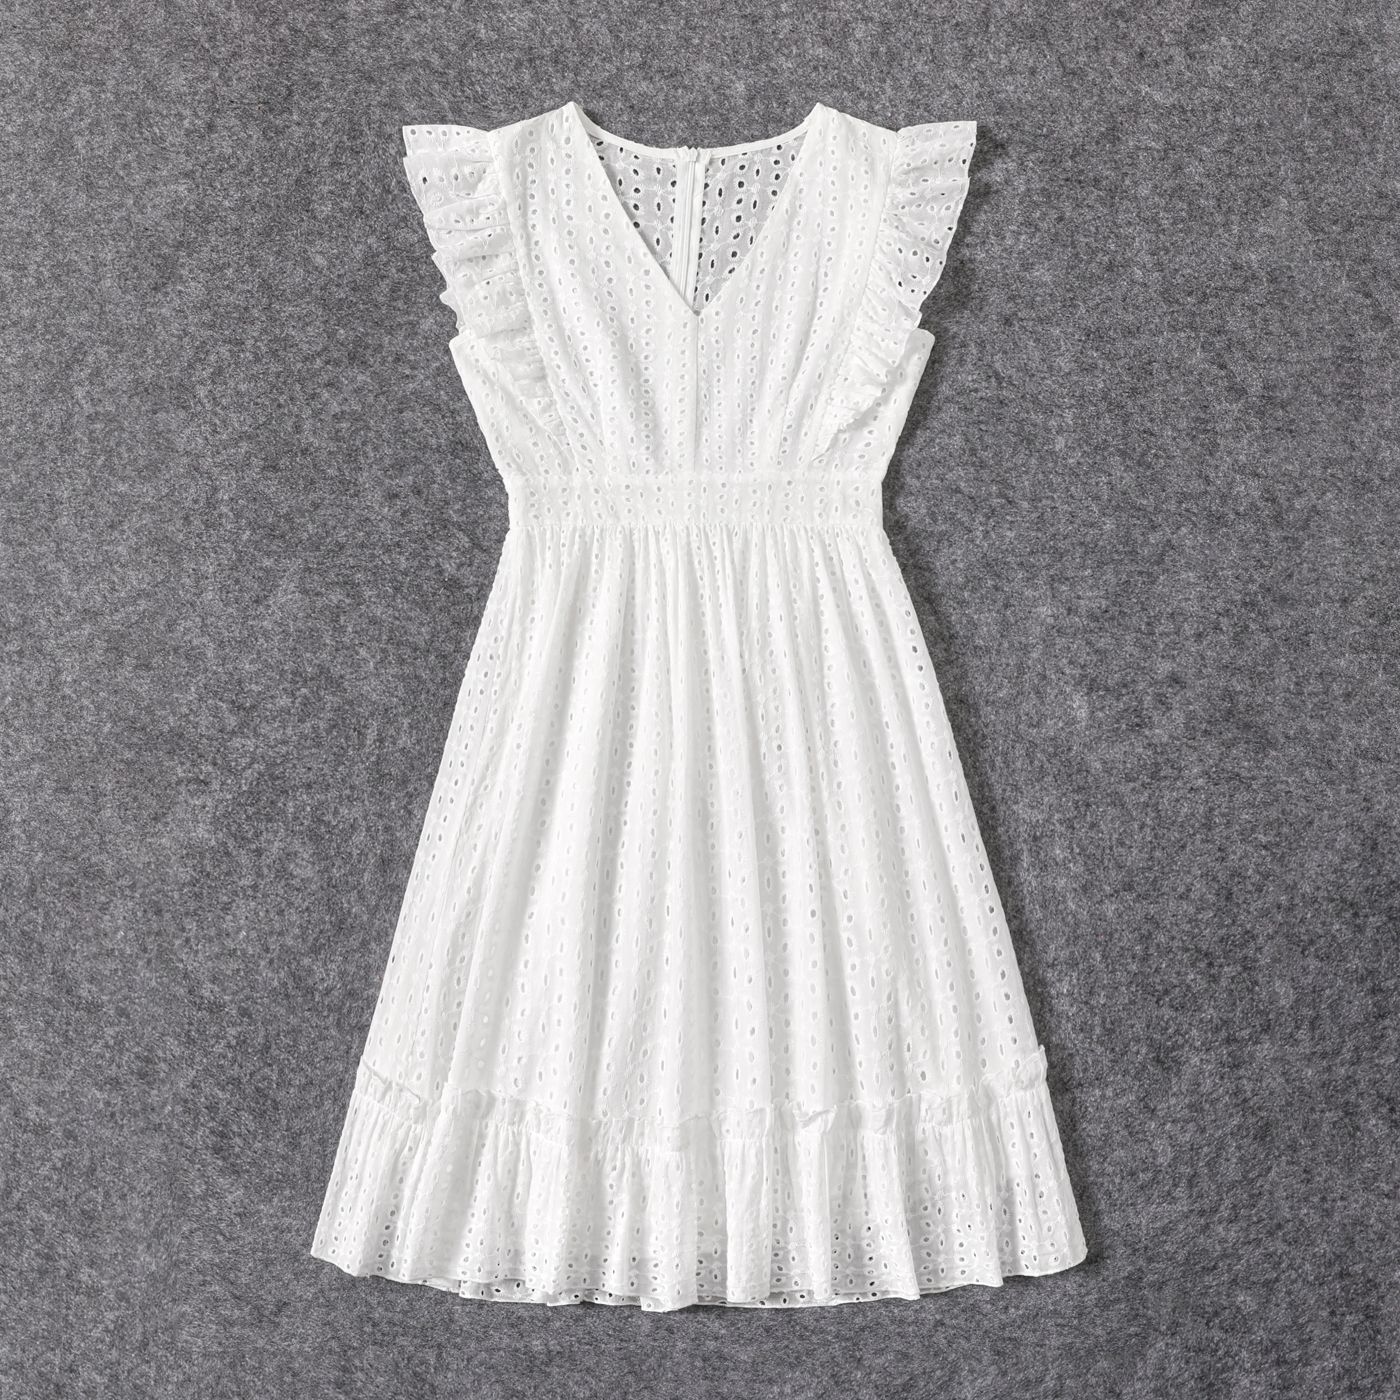 Mommy And Me 100% Cotton White Eyelet Embroidered Ruffle Trim Sleeveless Dresses